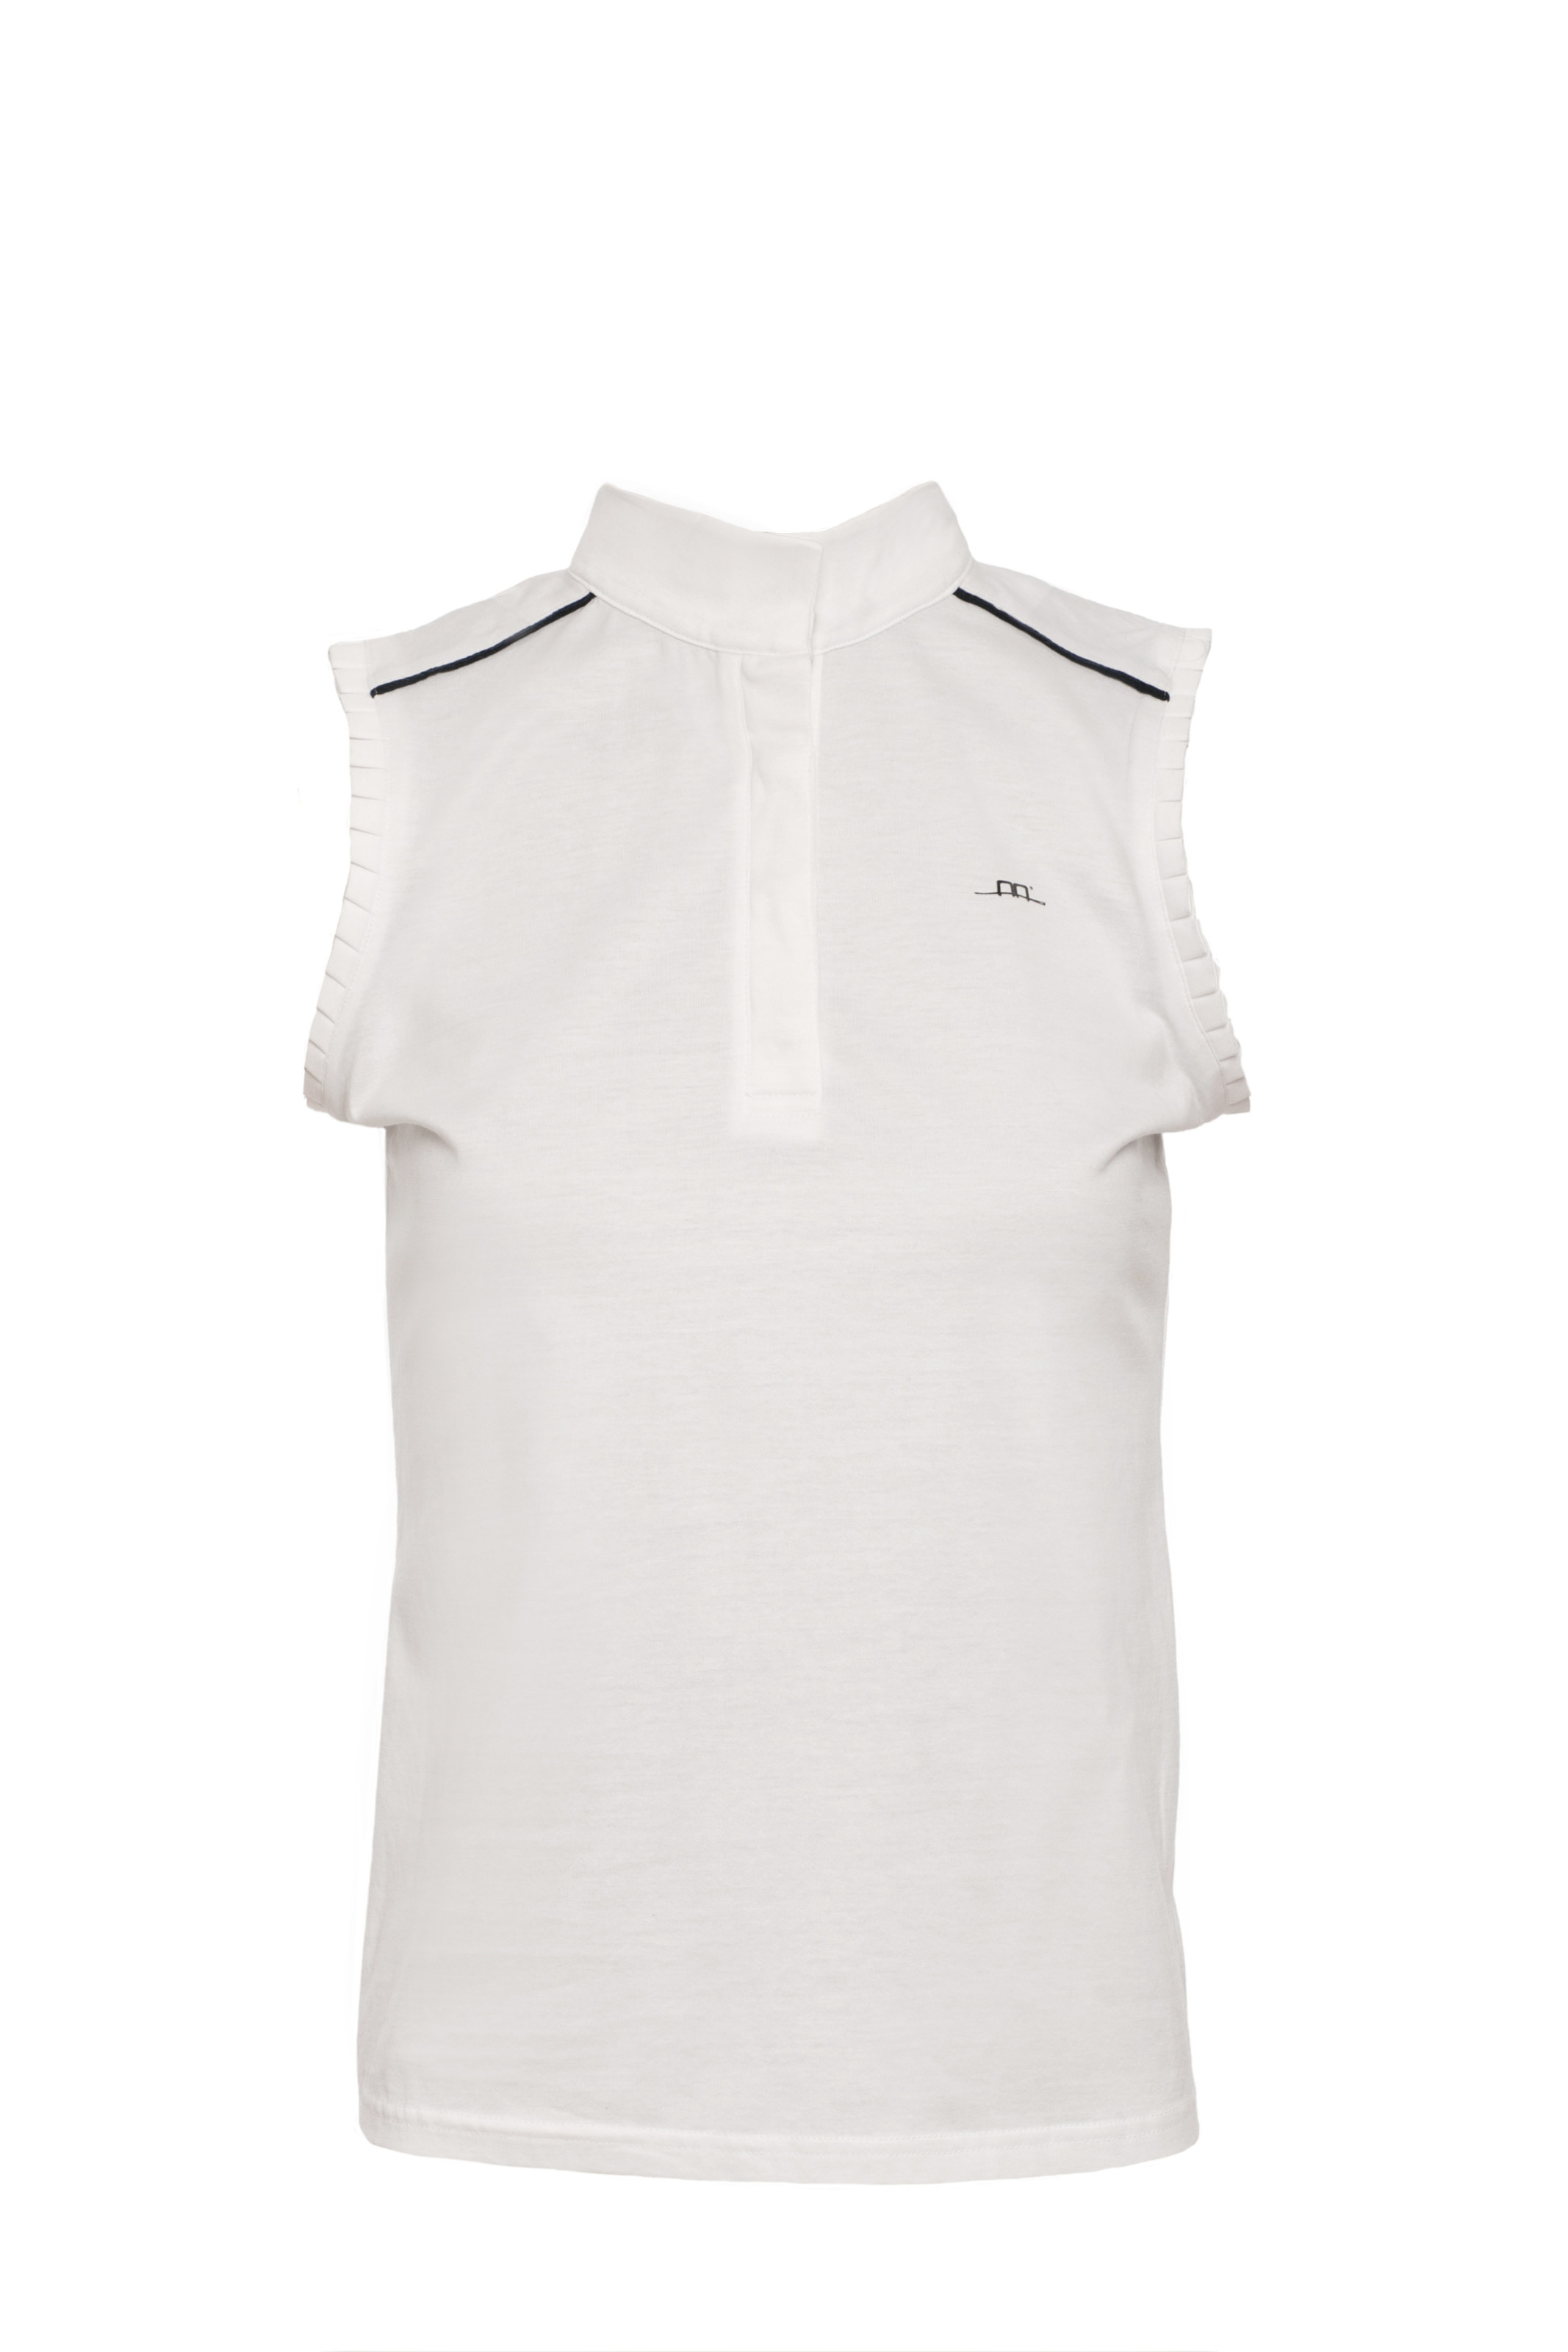 Alessandro Albanese Women's Monza Sleeveless Competition Top - White ...